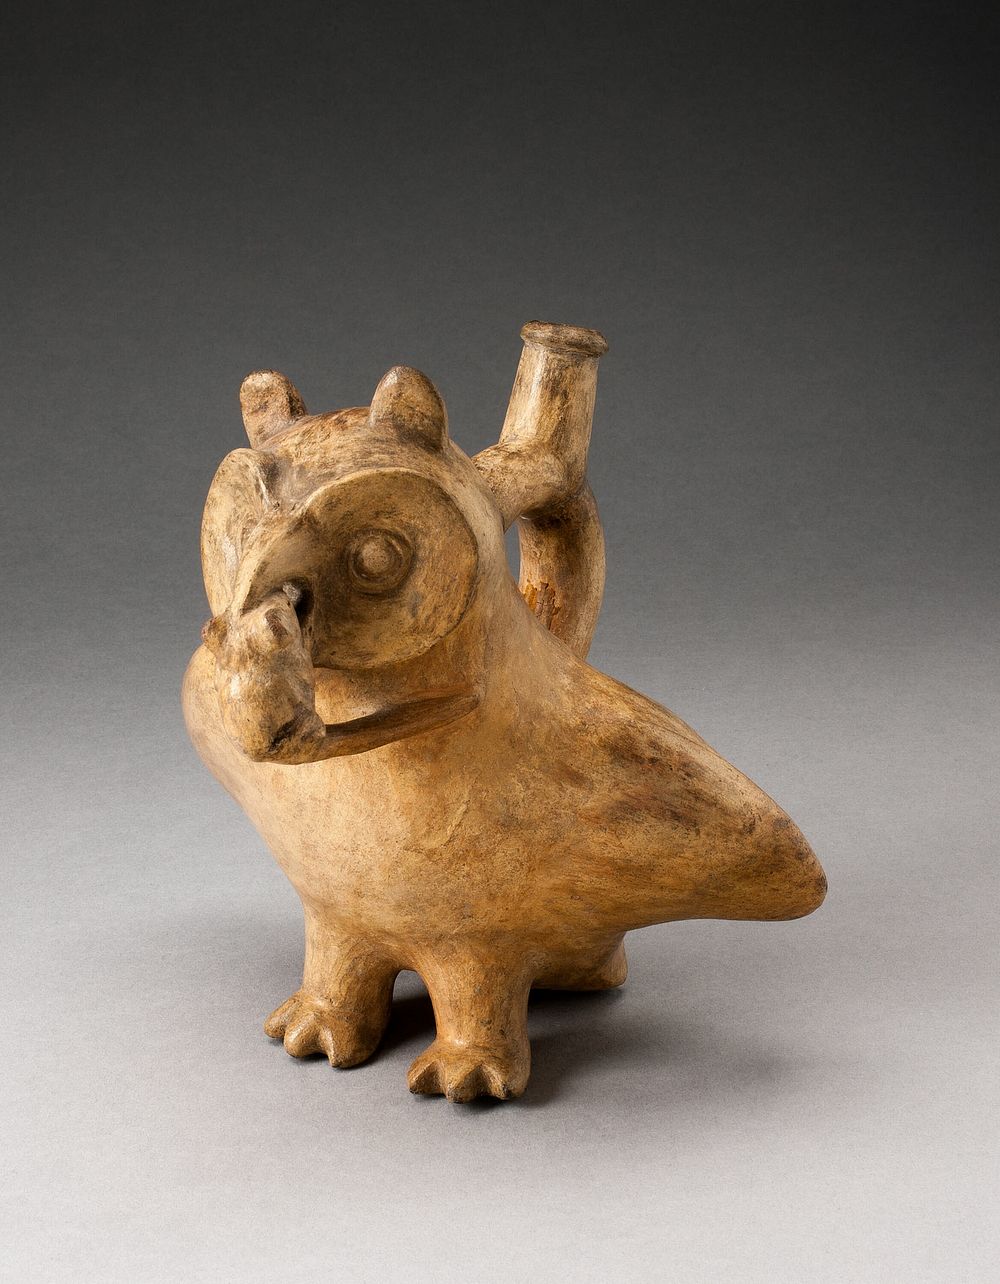 Handle Spout Vessel in Form of an Owl Eating a Mouse by Moche